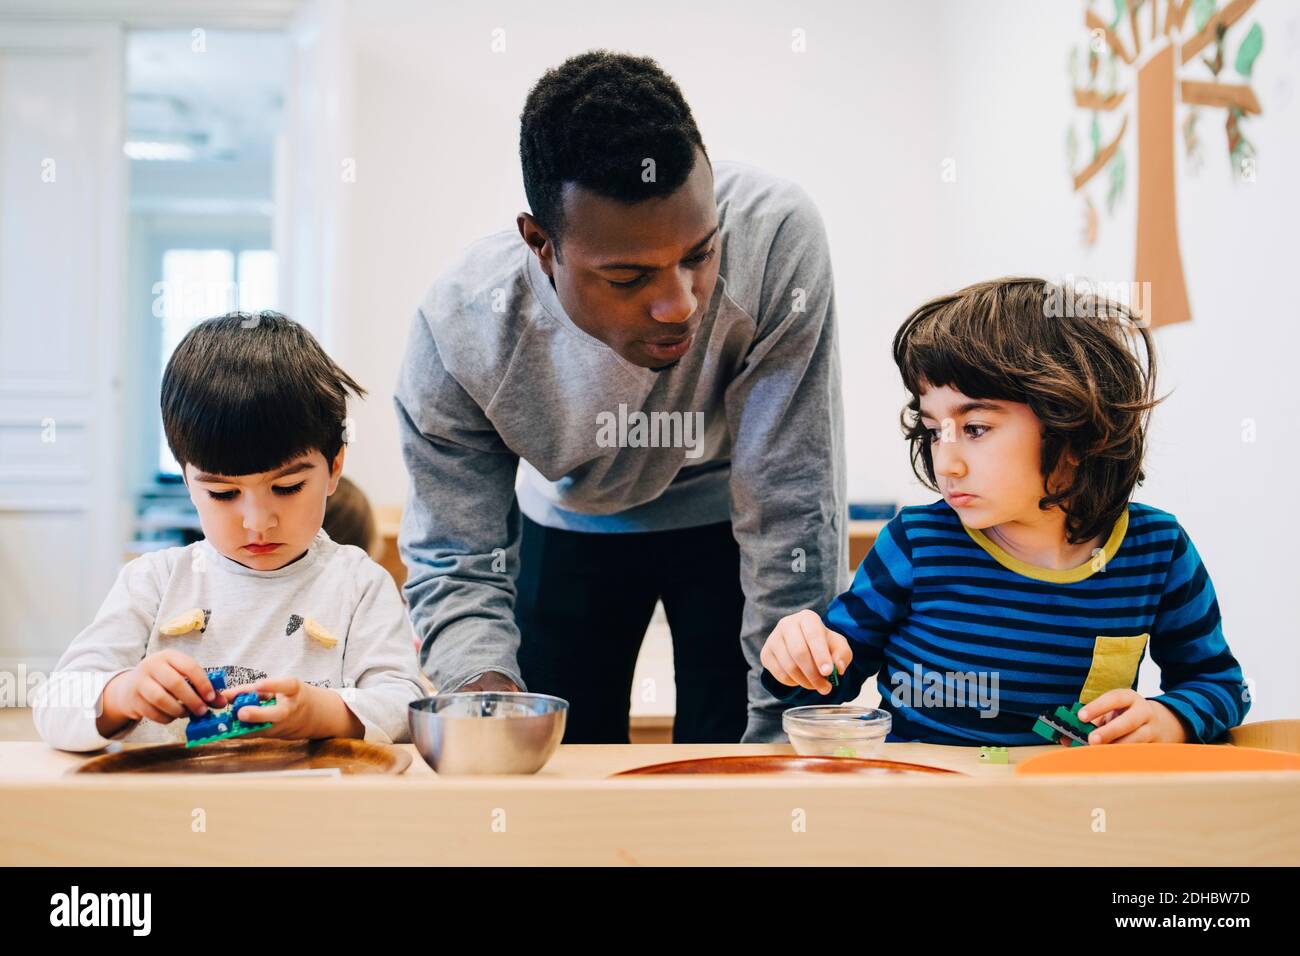 Male teacher looking at students playing with toys at table in child care classroom Stock Photo